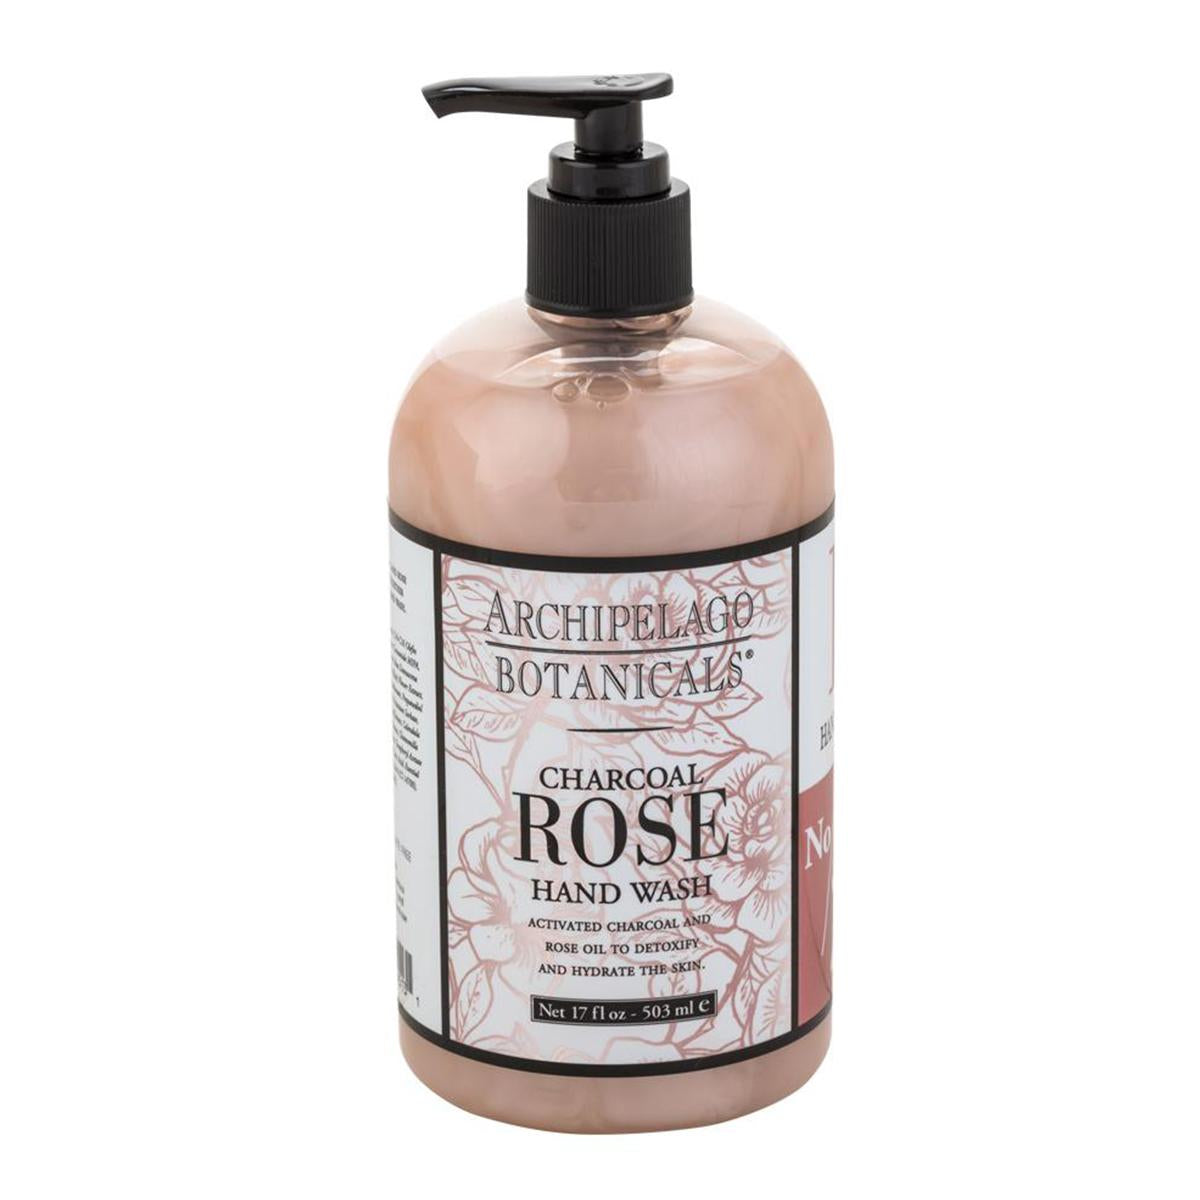 Primary image of Charcoal Rose Hand Wash